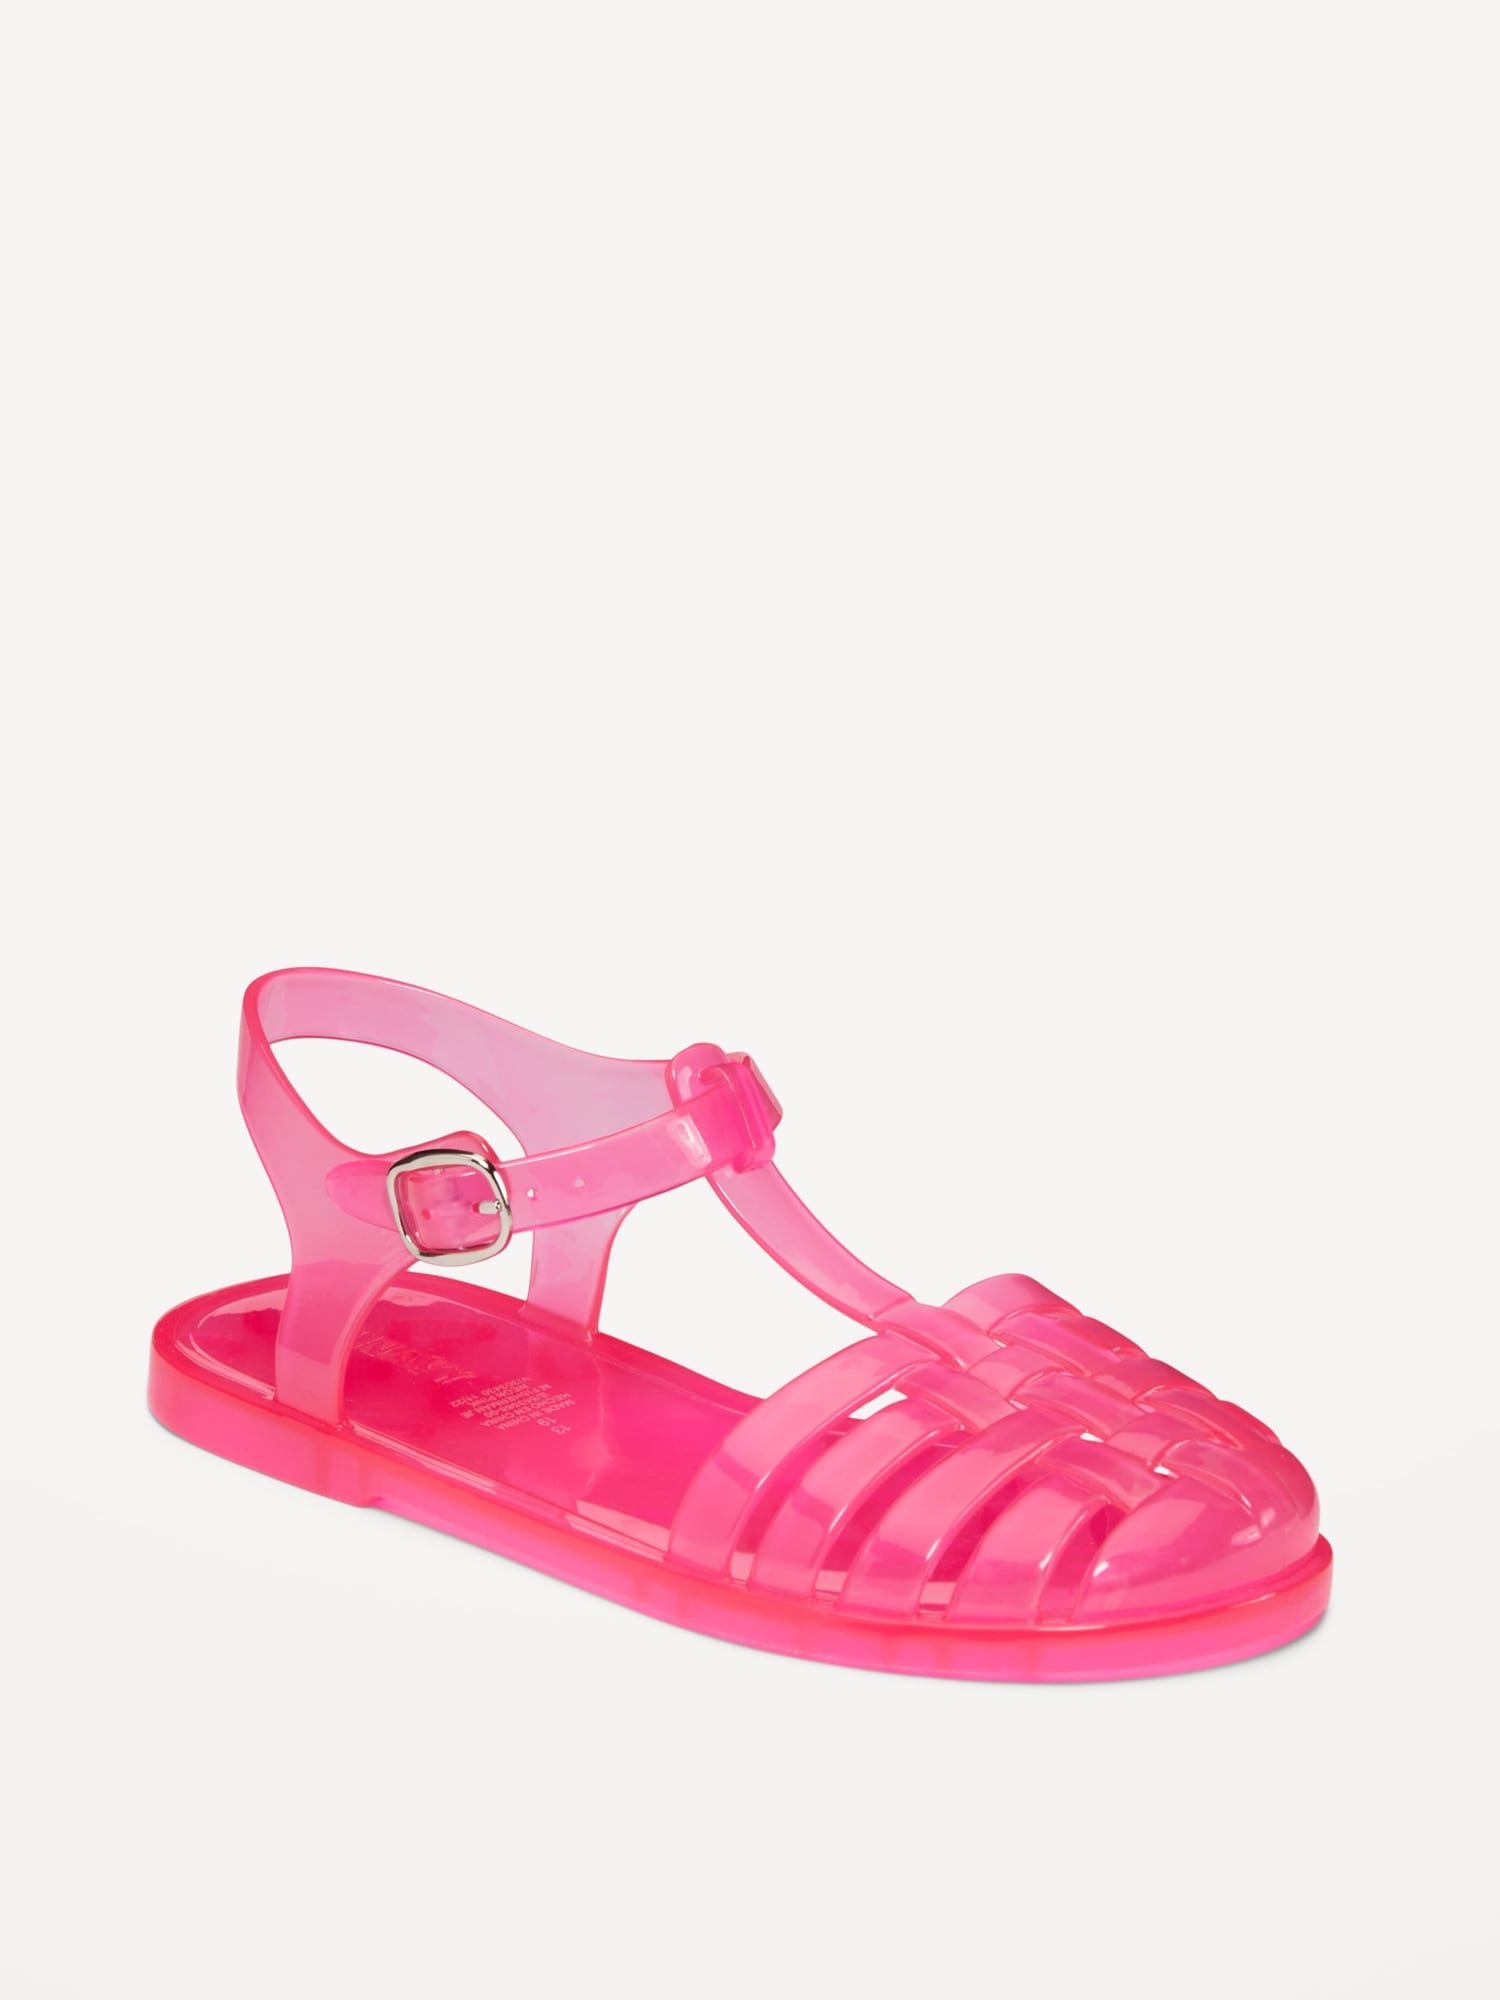 Old Navy Shiny-Jelly Fisherman Sandals for Girls pink. 1